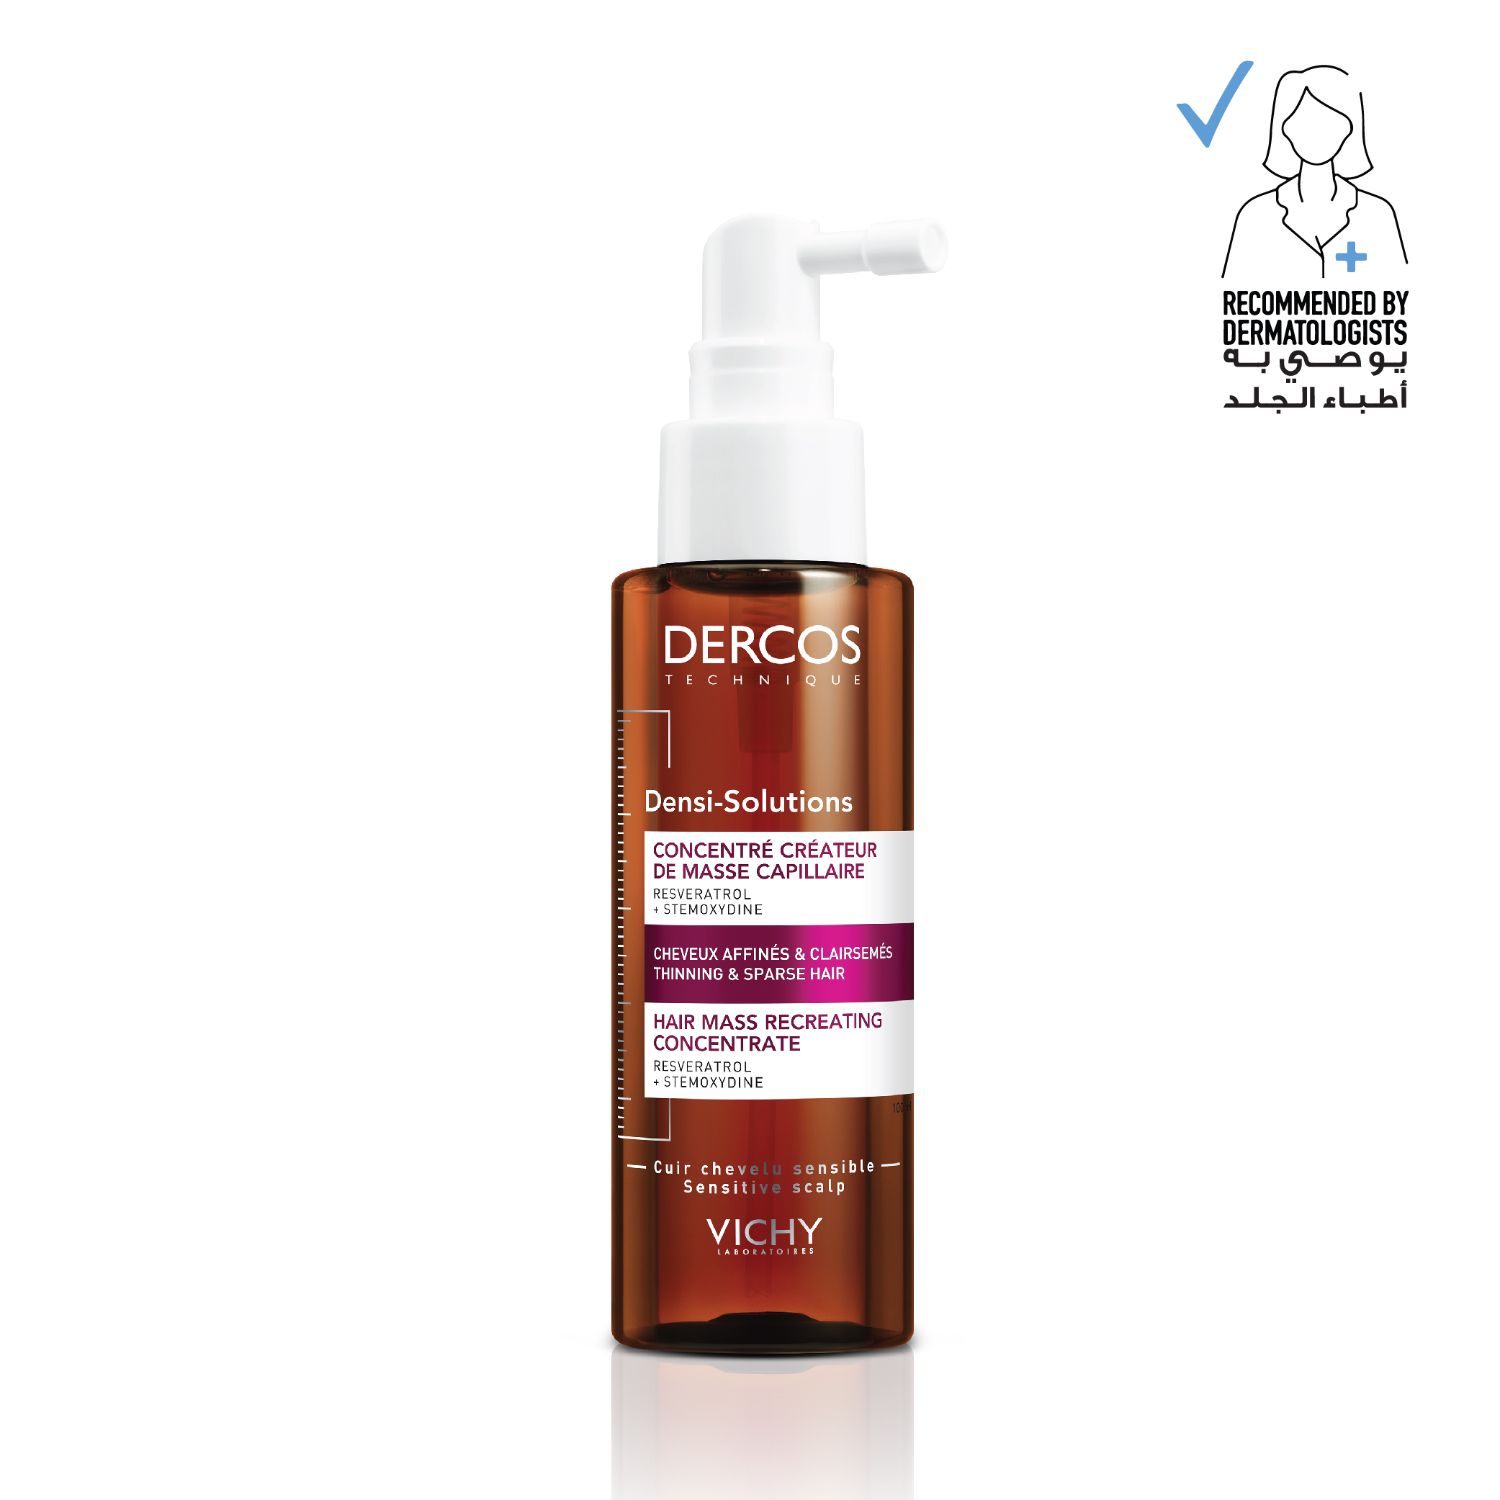 Product Image for Vichy Dercos Densi-Solutions Hair Mass Recreating Concentrate 100ml